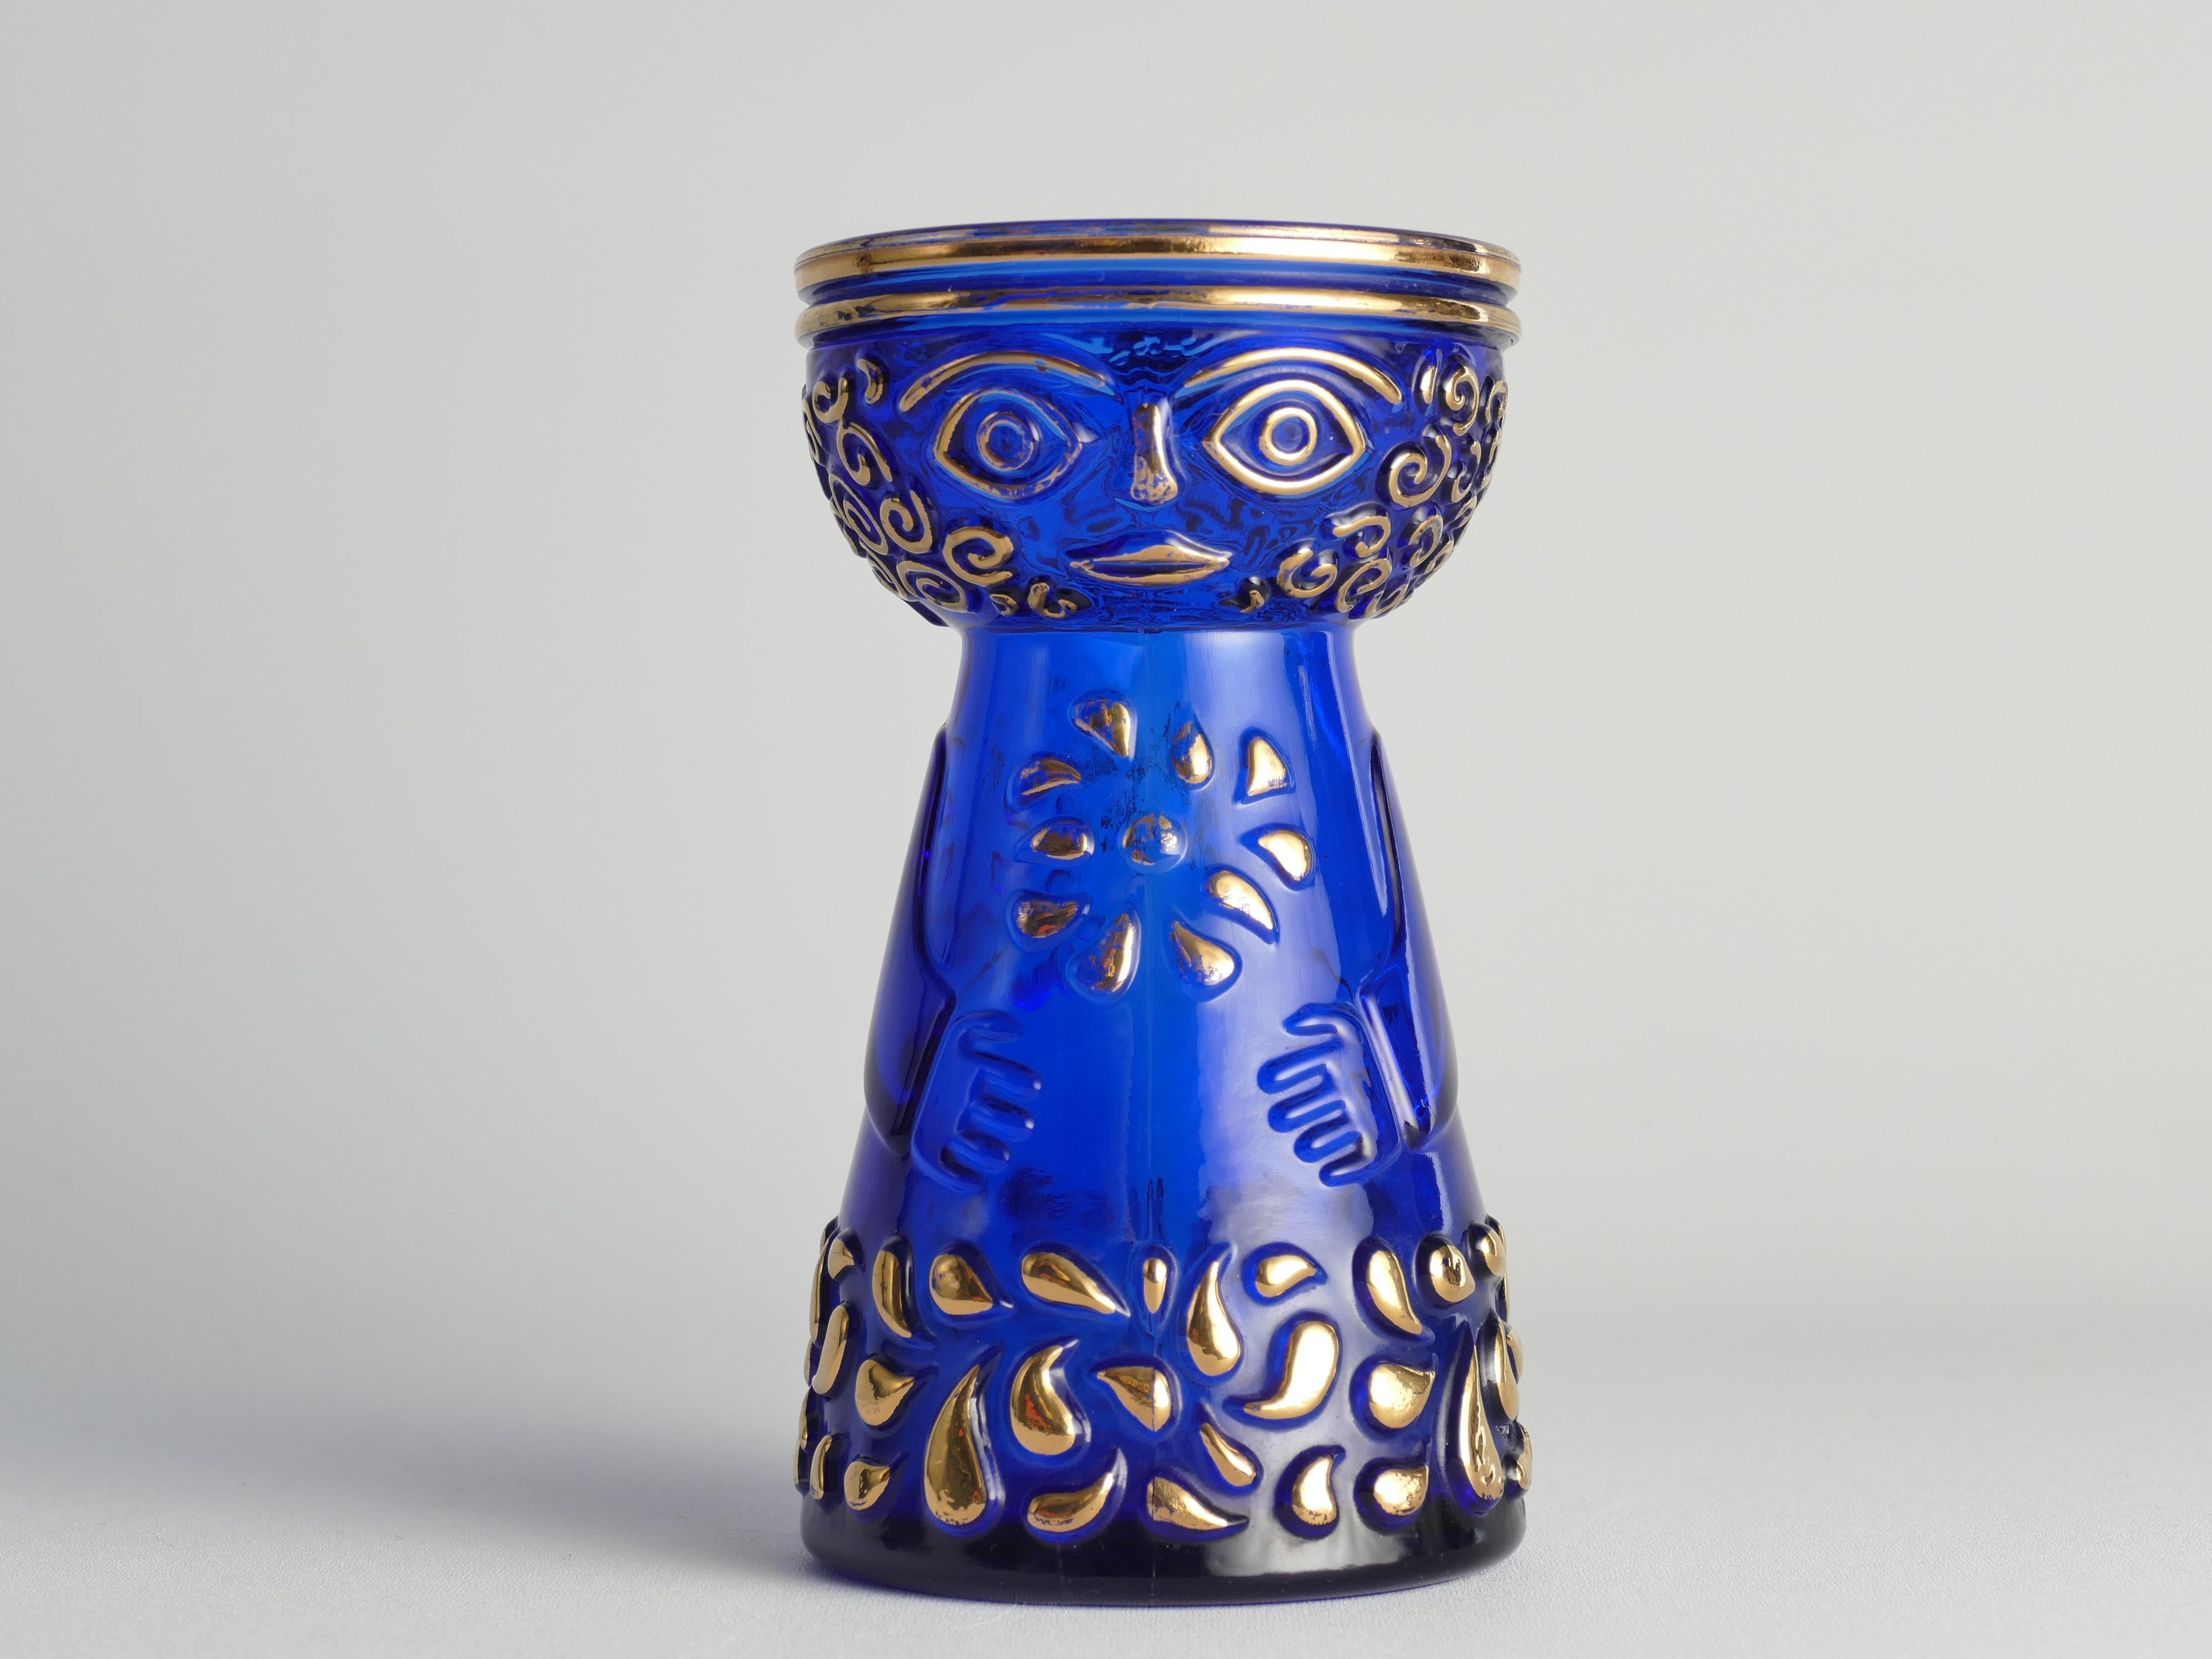 This mid-century modern cobalt blue vase with gold accents, this enchanting hyacinth vase originates from the 1970s and is a product of Walther Glas. Clearly influenced by the designs of Danish artist Björn Wiinblad, the vase takes the form of a